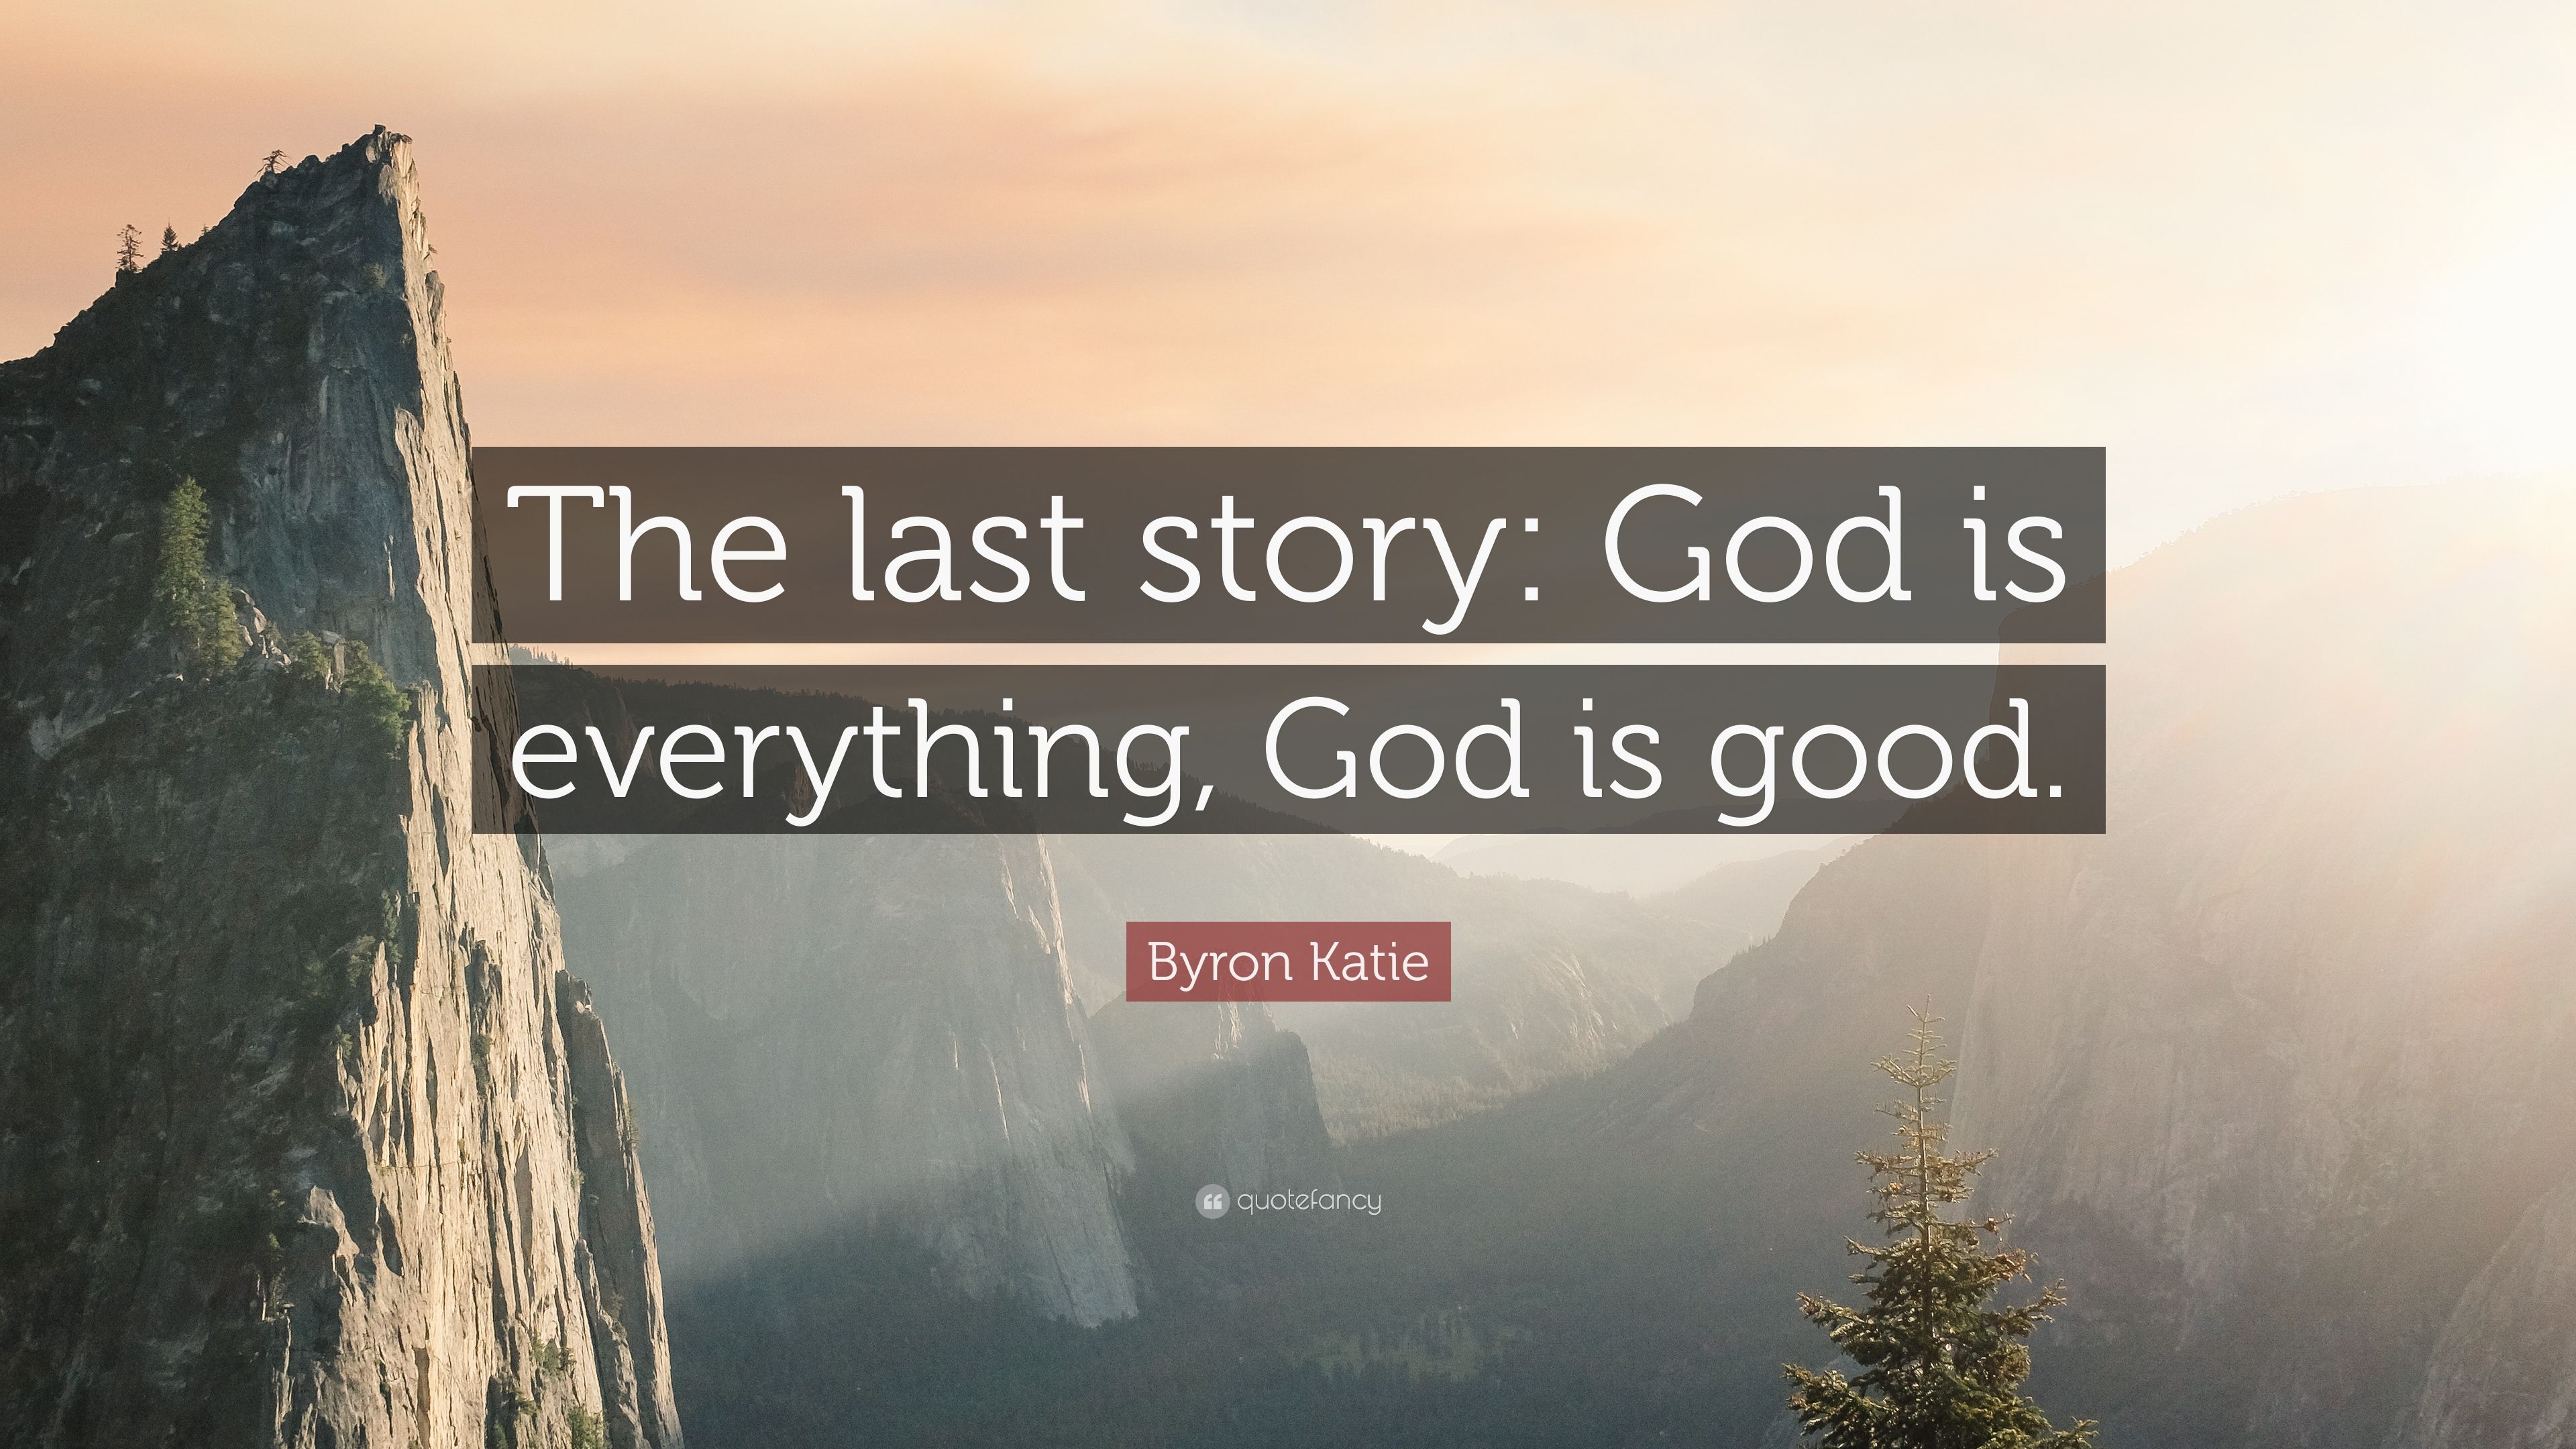 Byron Katie Quote: “The last story: God is everything, God is good.” (12 wallpaper)